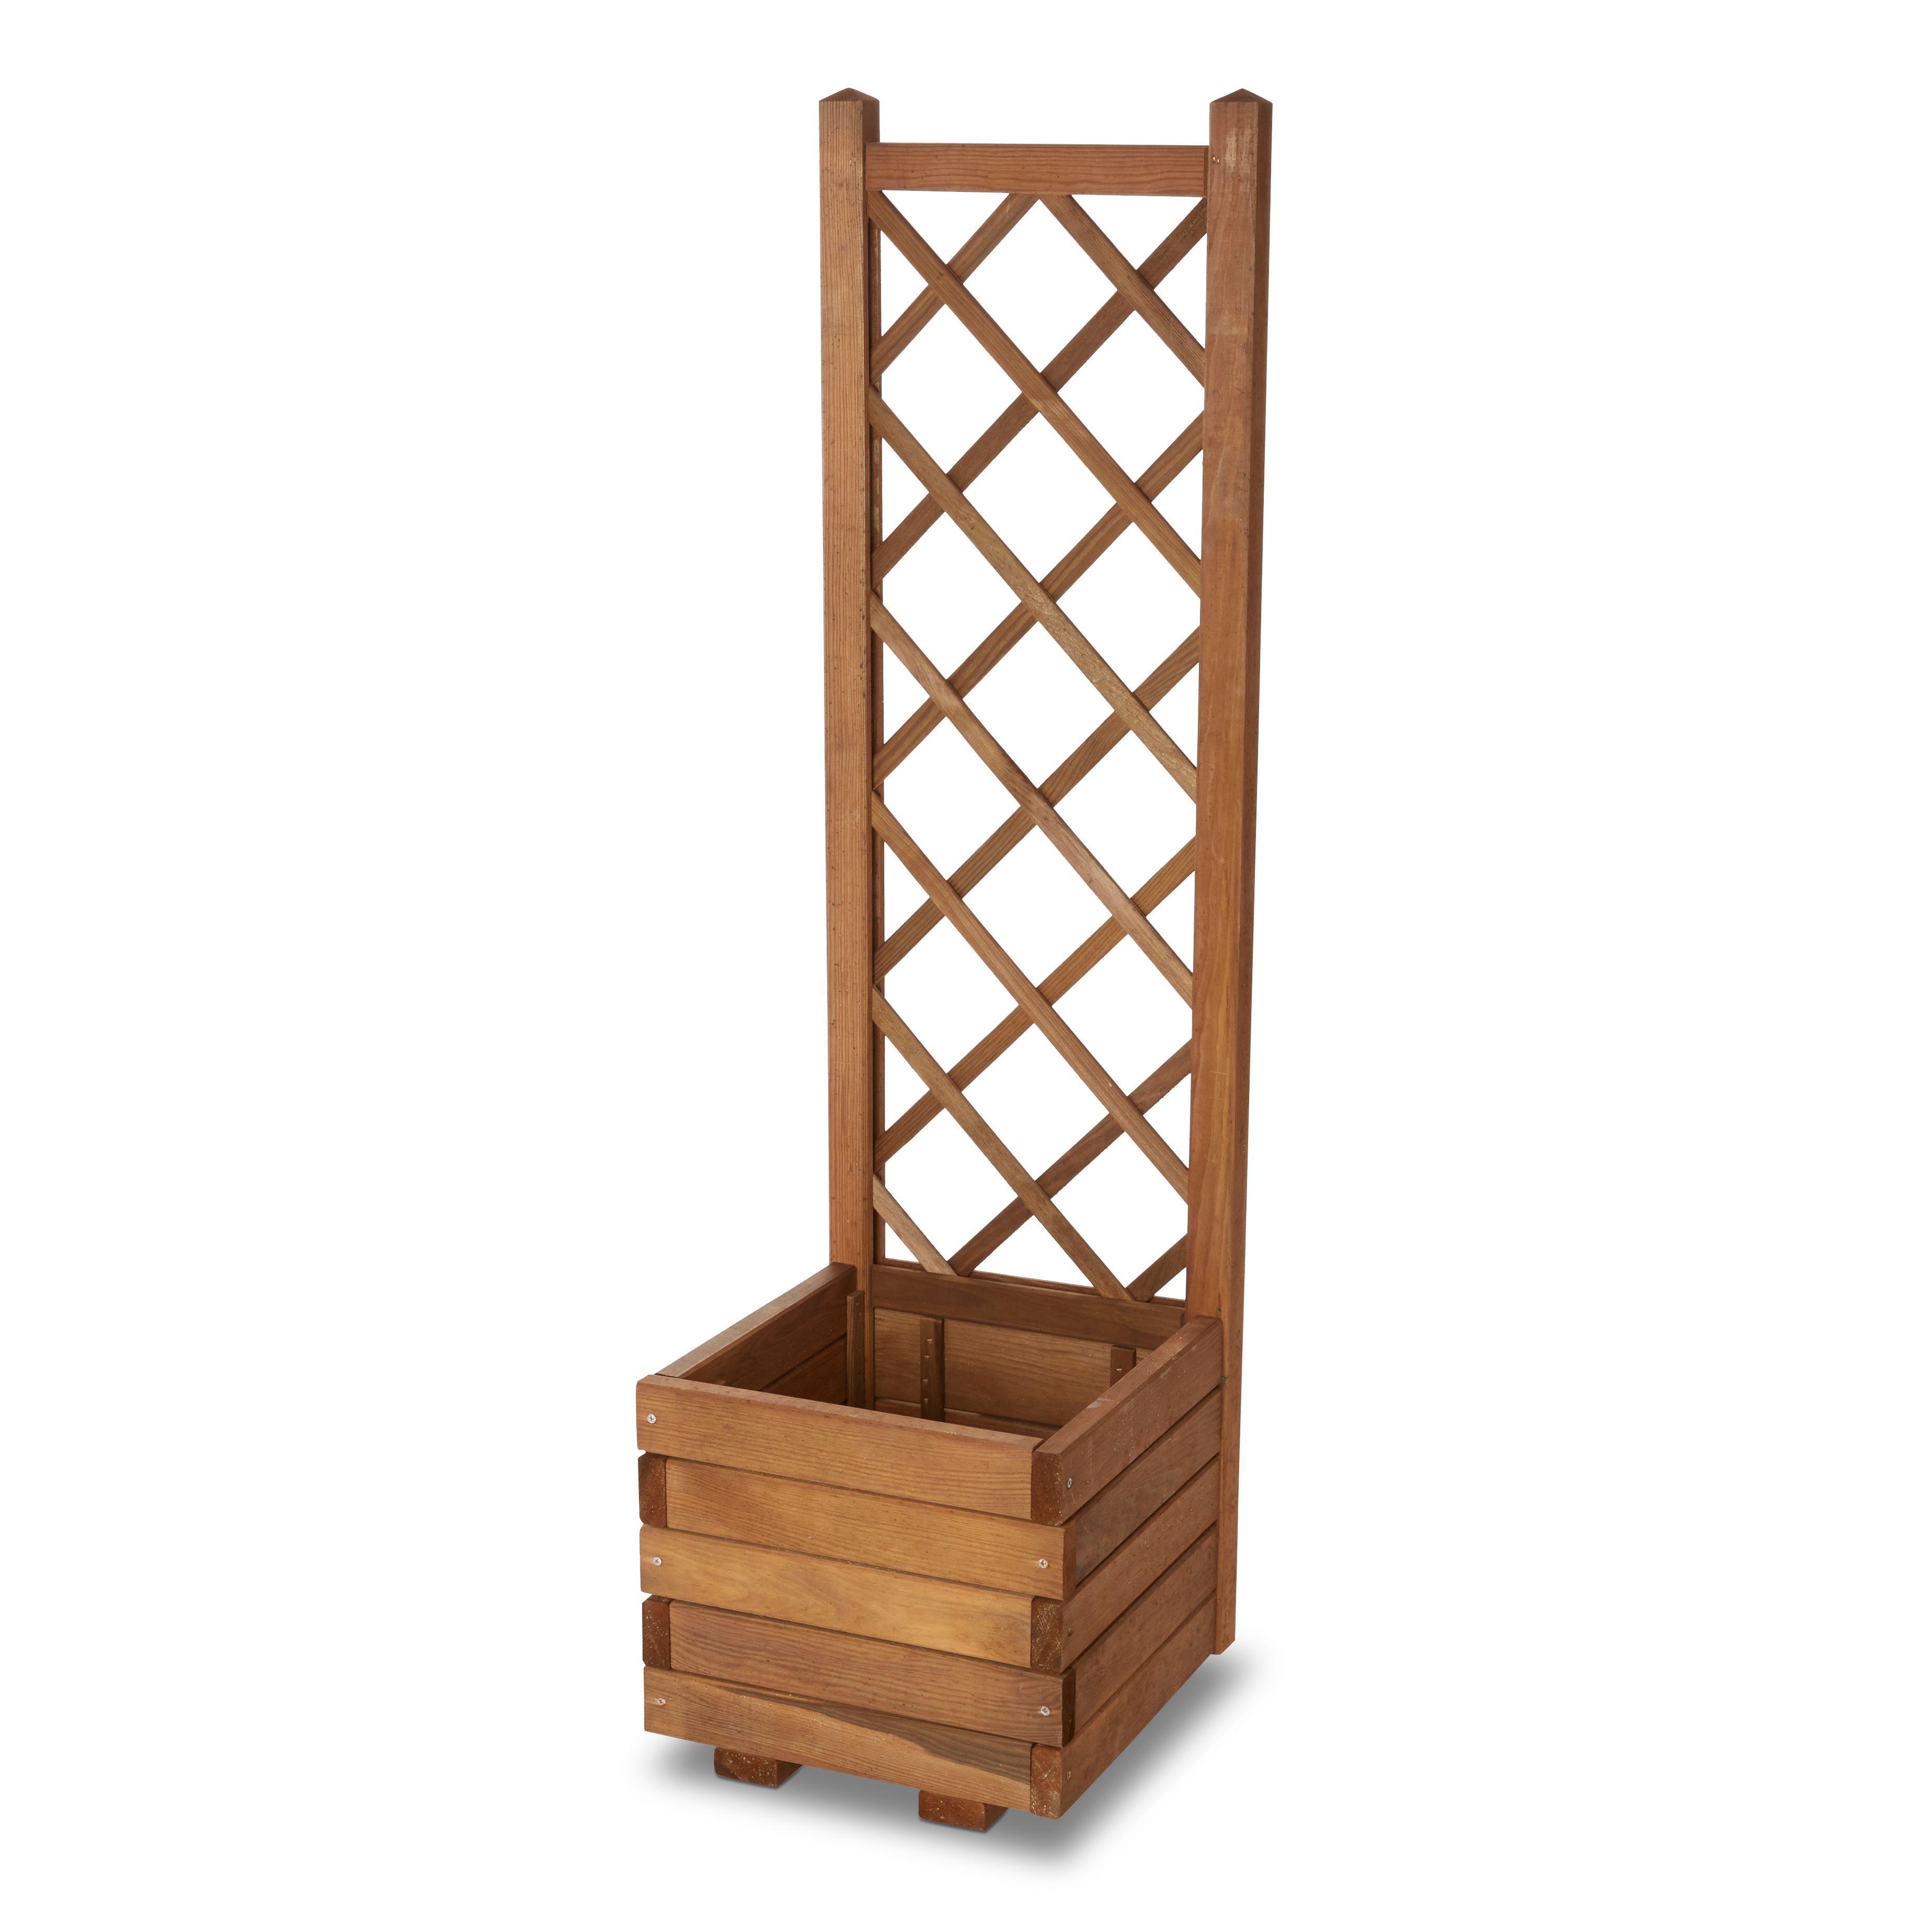 Blooma Bopha Brown Wooden Square Planter